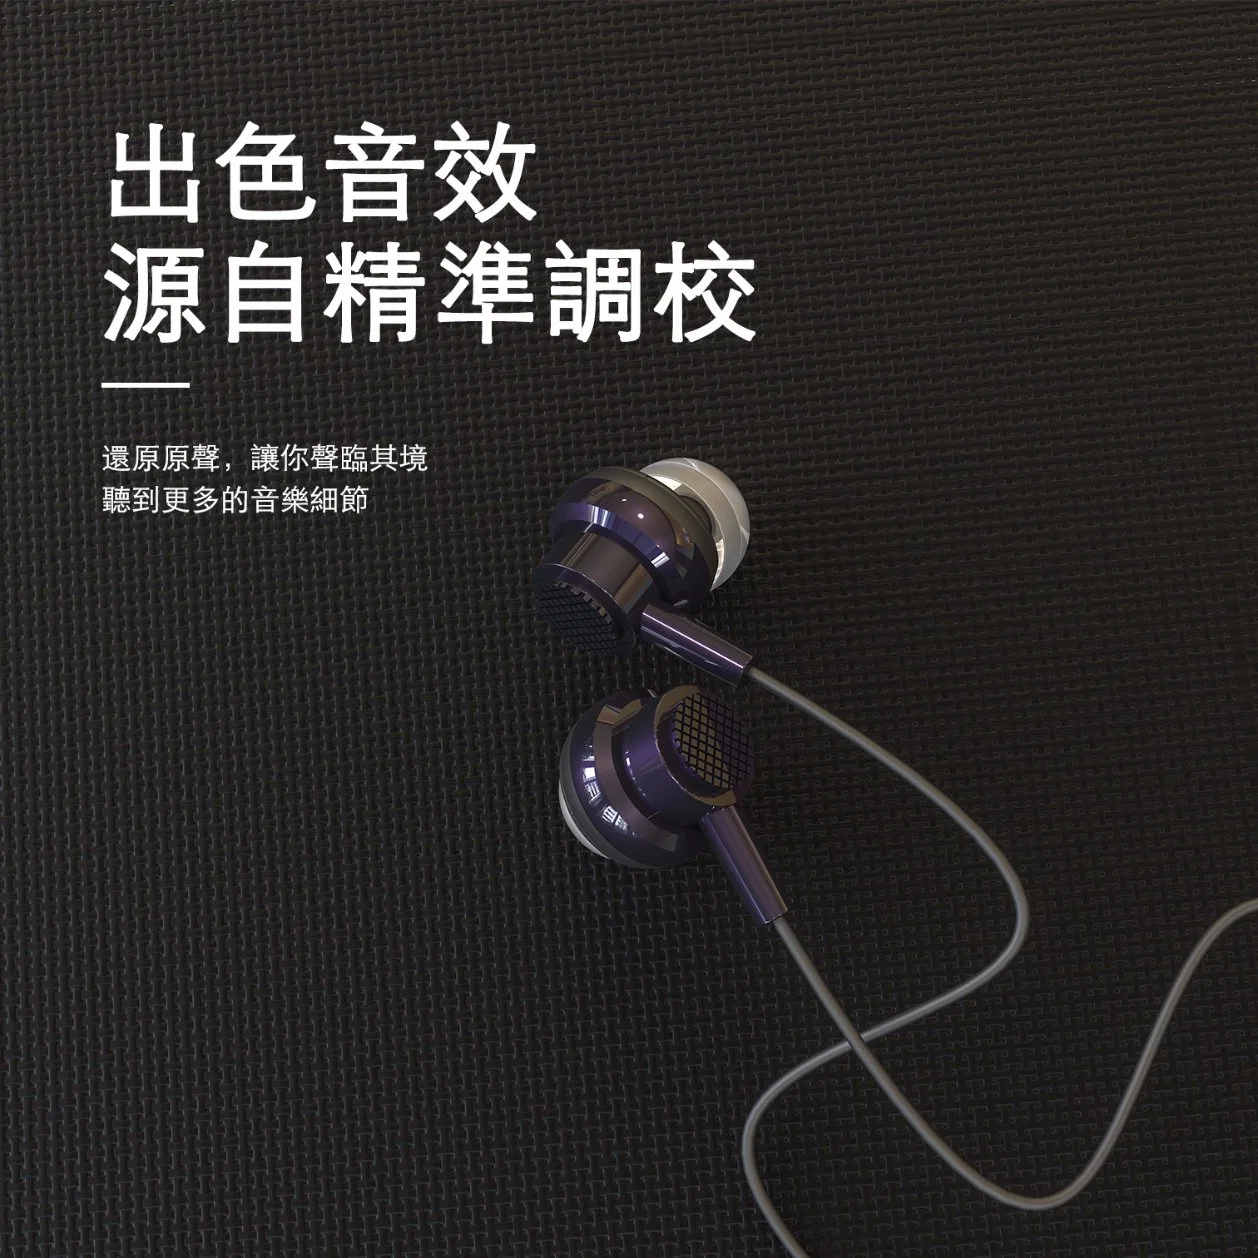 Favorable Price Handsfree in Ear Wired Earphone with Mic for Mobile Phone